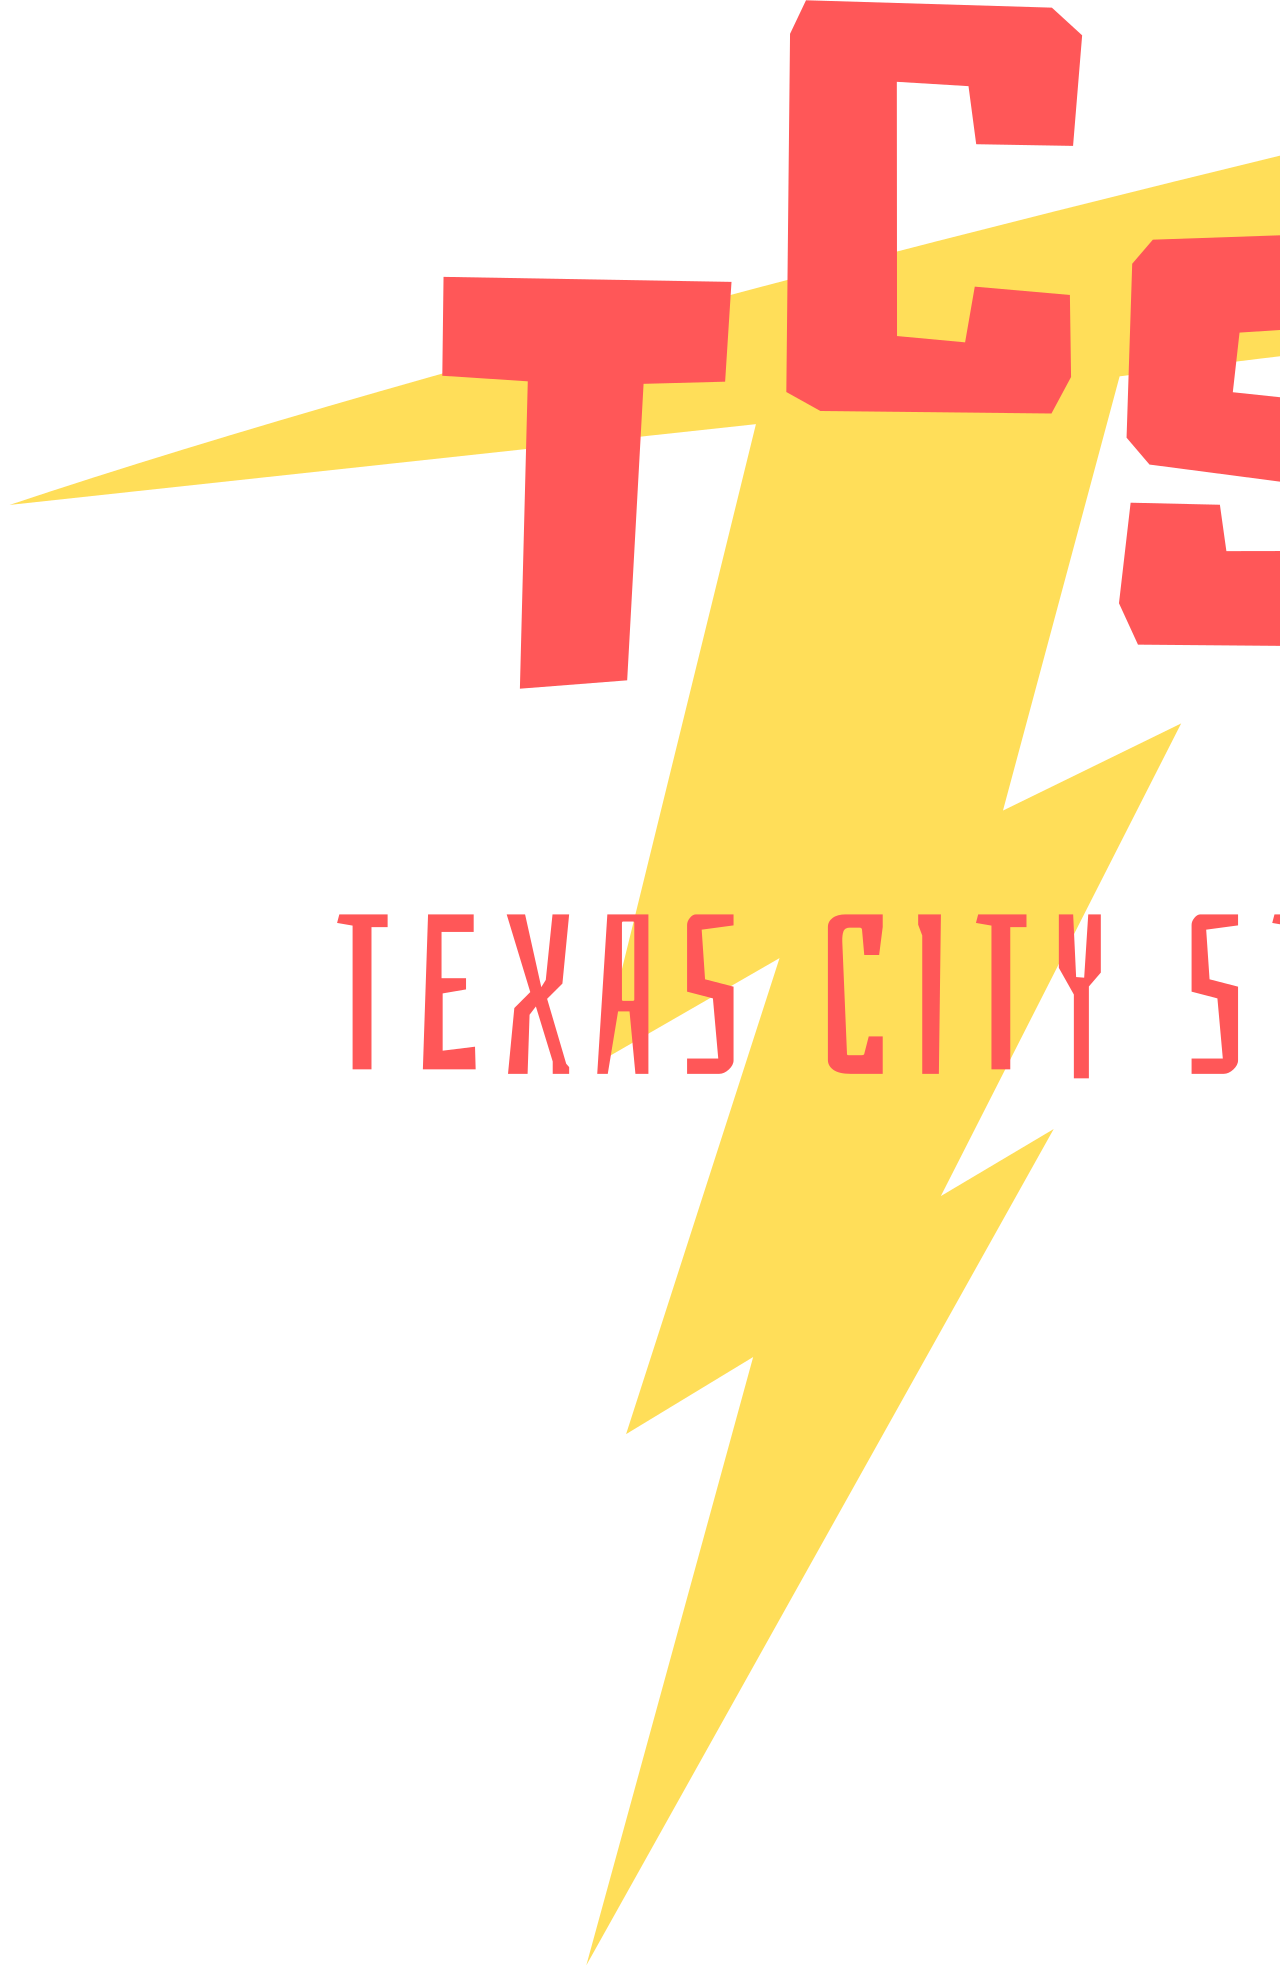 TEXAS CITY STEEL's web page